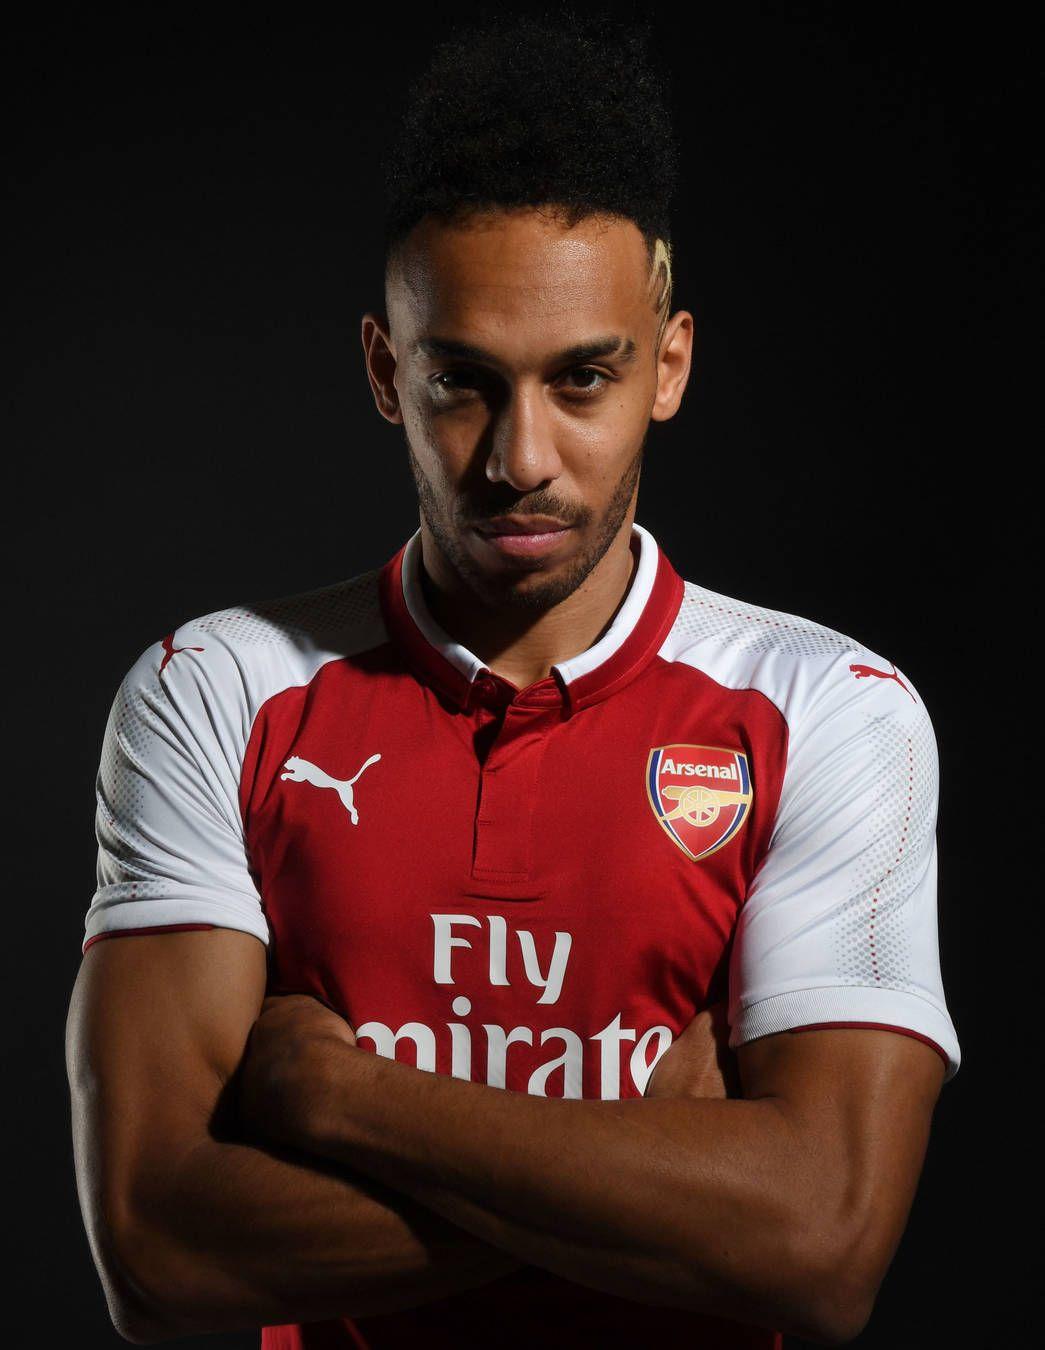 Picture: Pierre Emerick Aubameyang In Arsenal Kit. Gallery. News